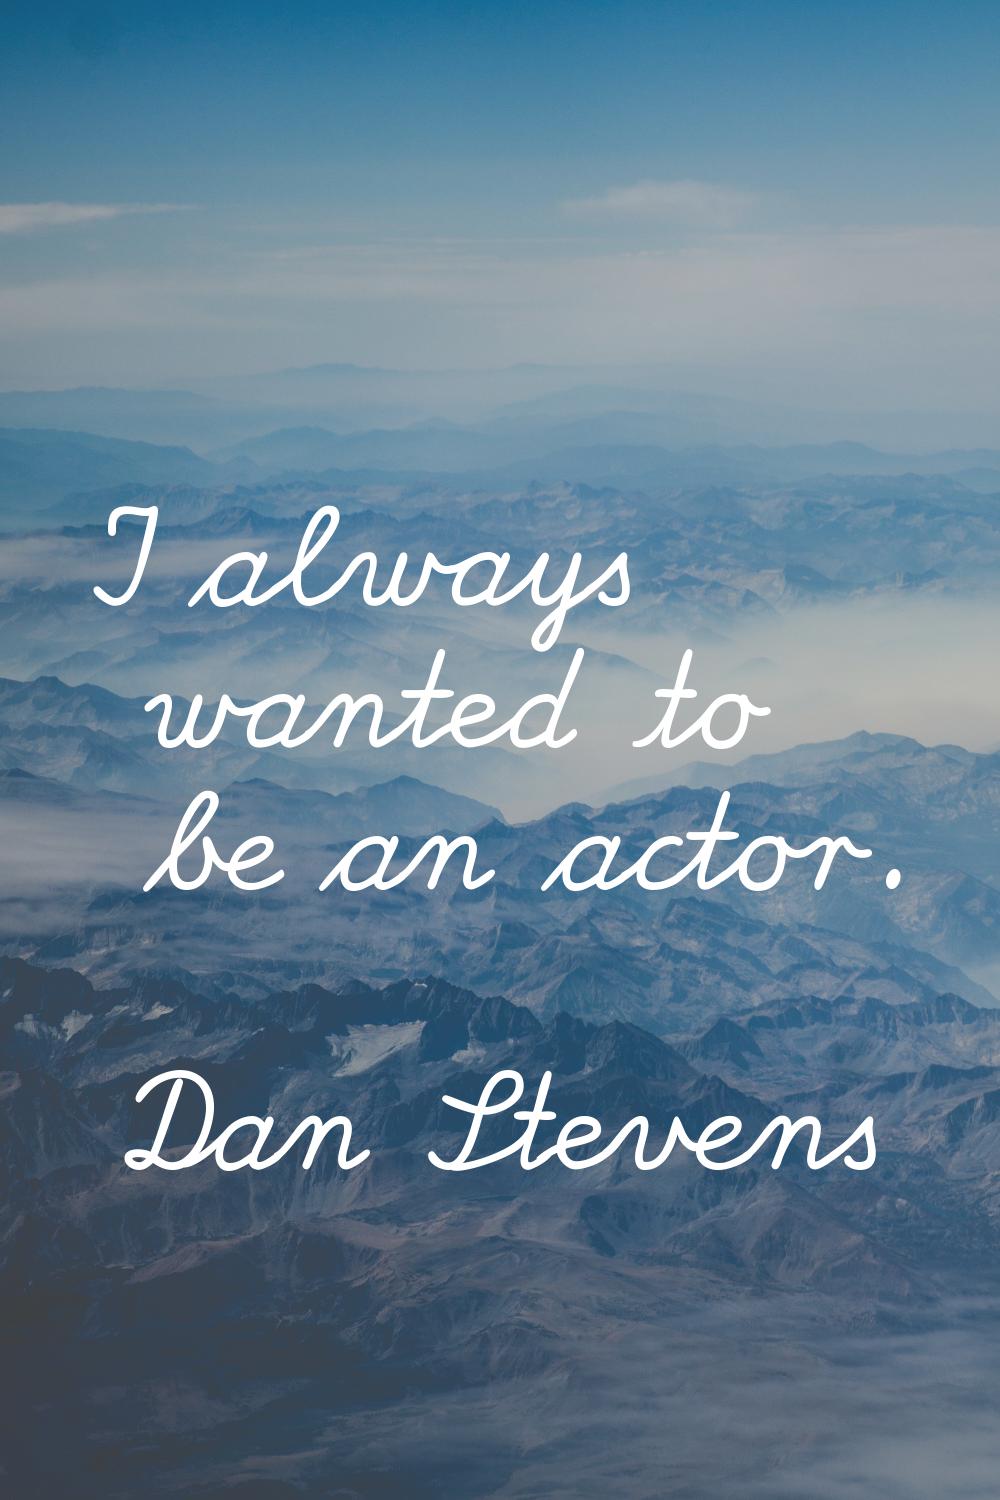 I always wanted to be an actor.